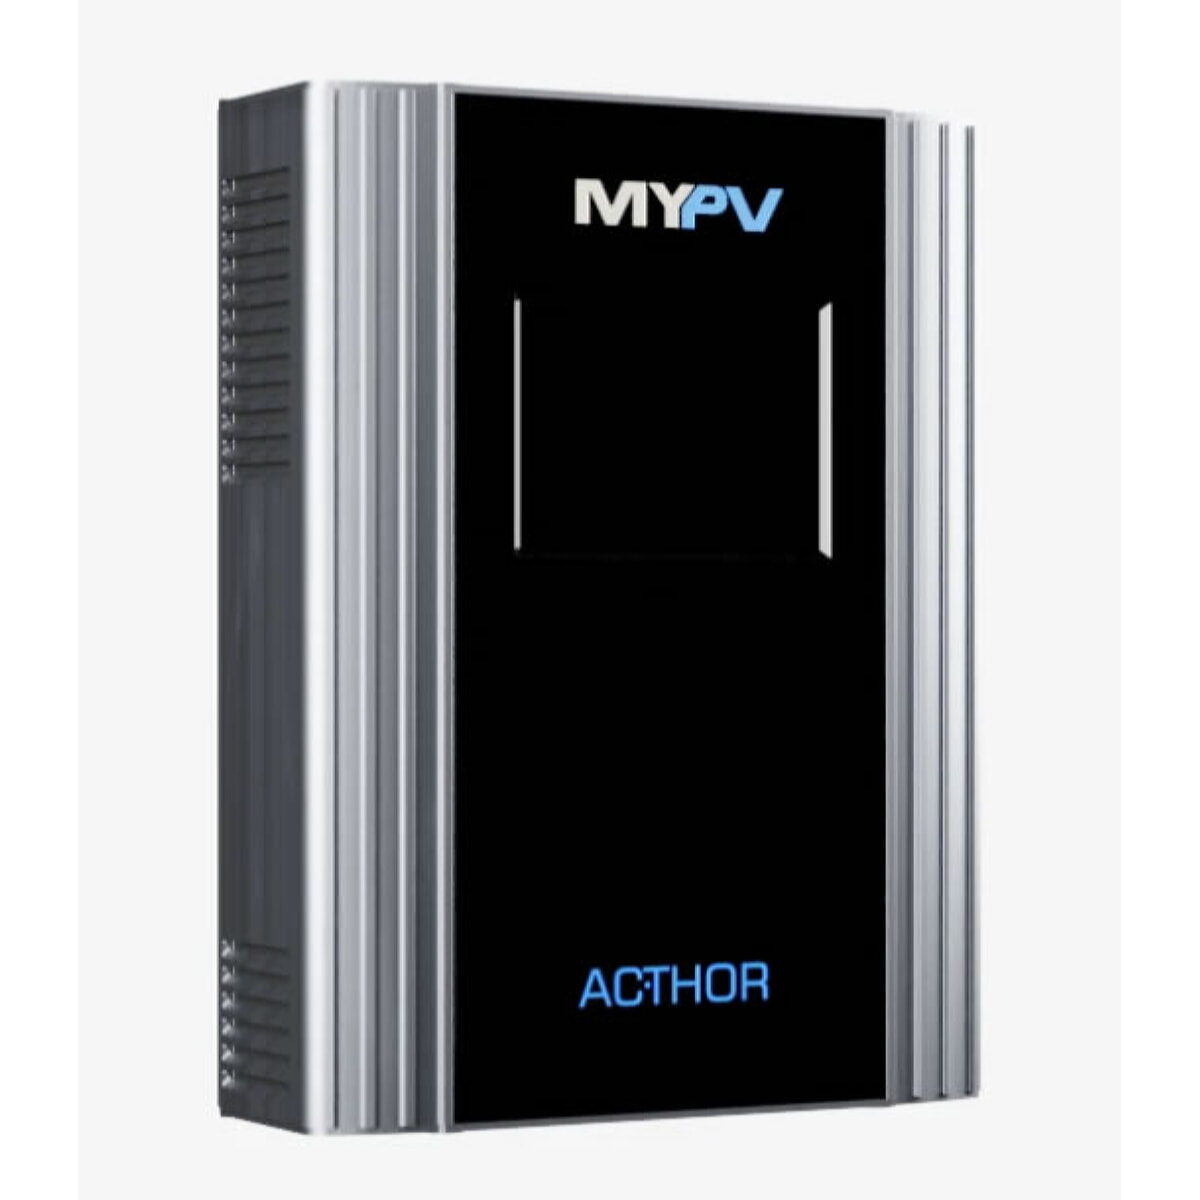 my-PV Photovoltaik Power-Manager AC THOR 9s